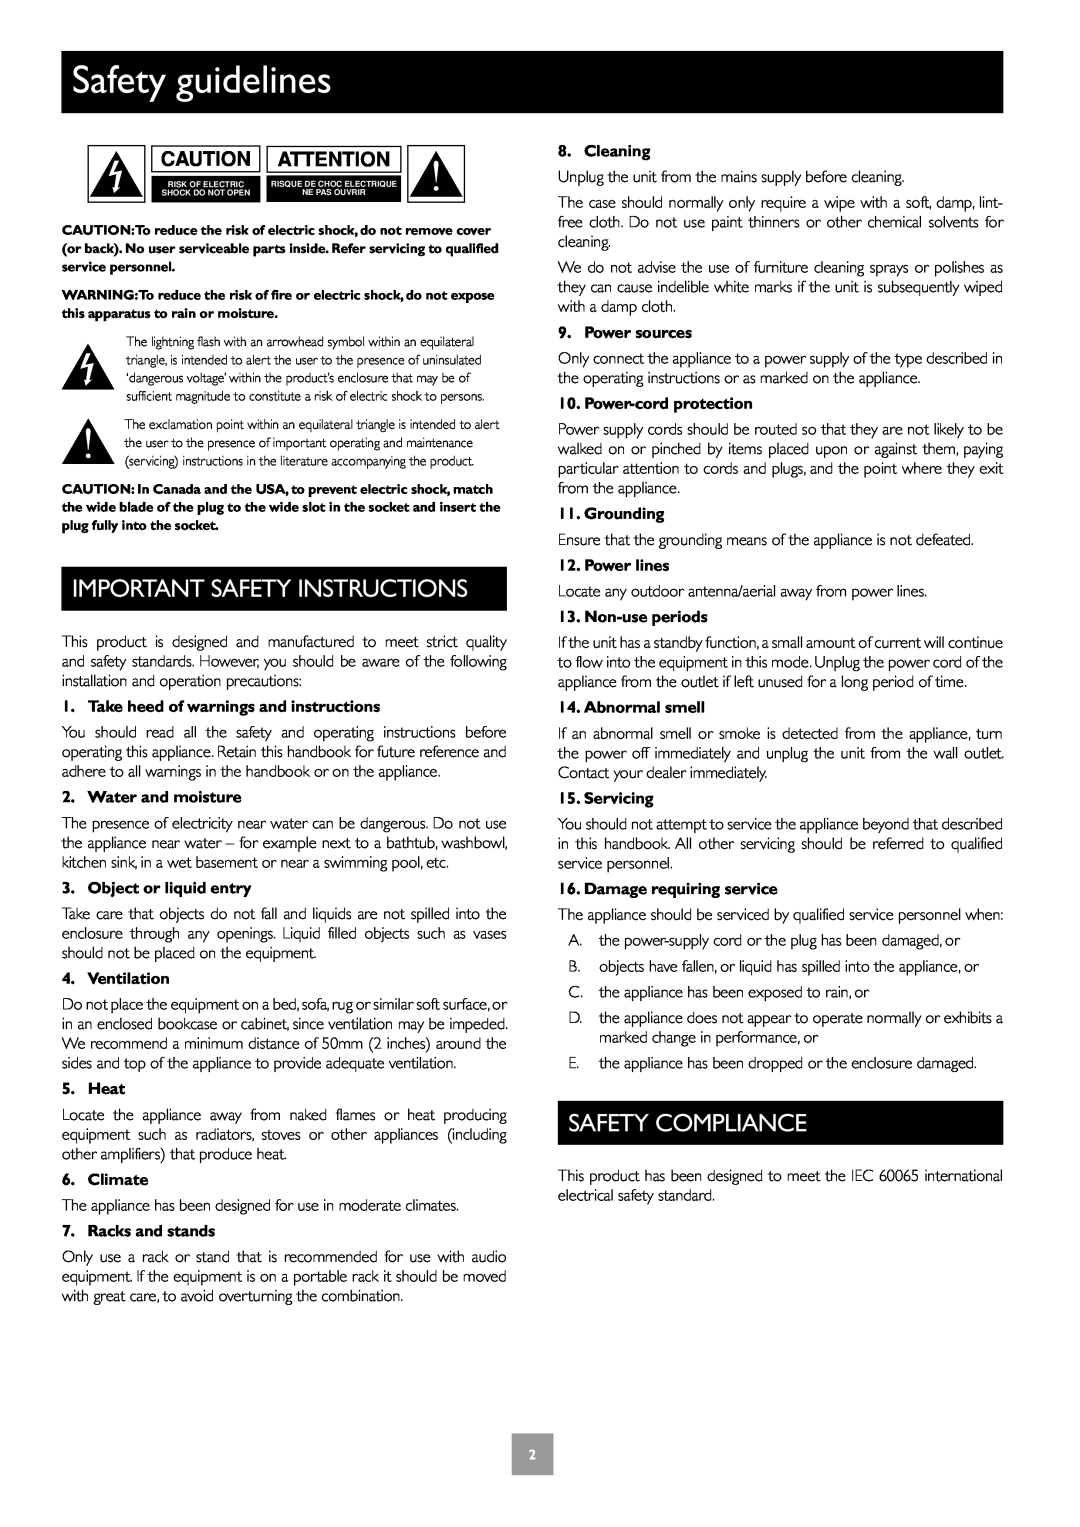 Arcam P35 manual Safety guidelines, Important Safety Instructions, Safety Compliance 